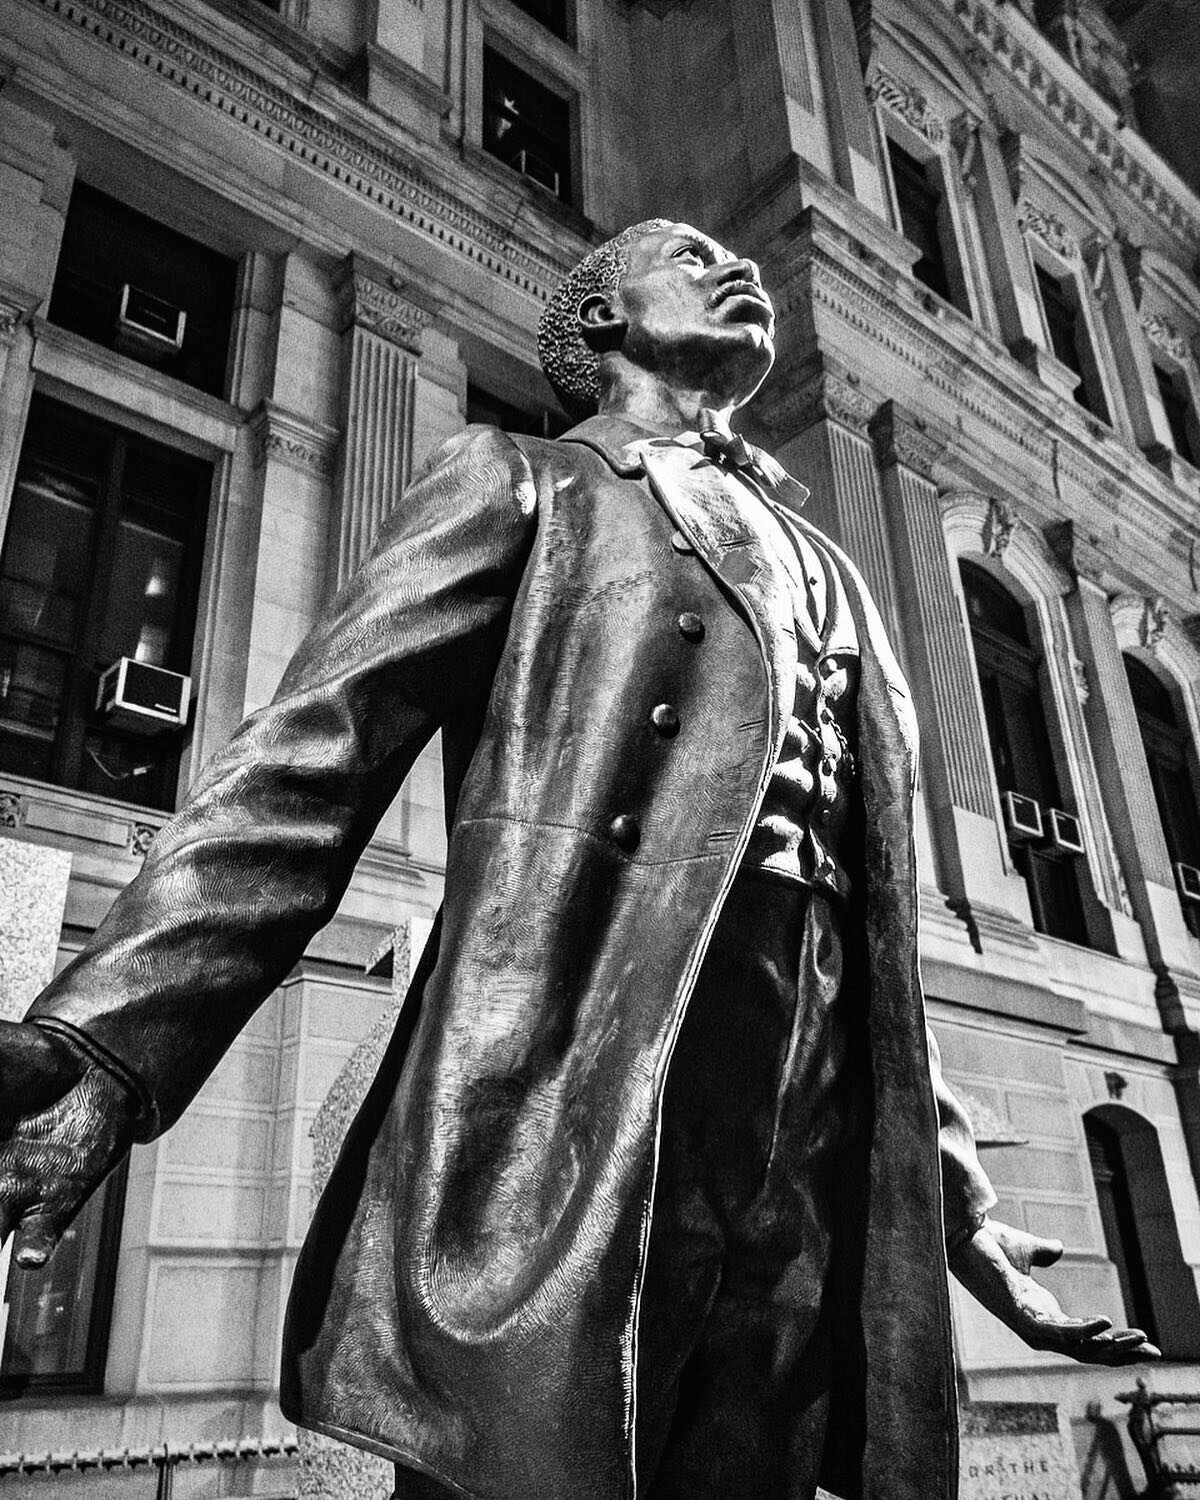 Erected in 2017 at Philadelphia&rsquo;s City Hall is a beautiful monument entitled &ldquo;A Quest for Parity&rdquo;created by sculptor Branly Cadet.  It celebrates the life work of African American activist Octavius V. Catto.  An educator, scholar an